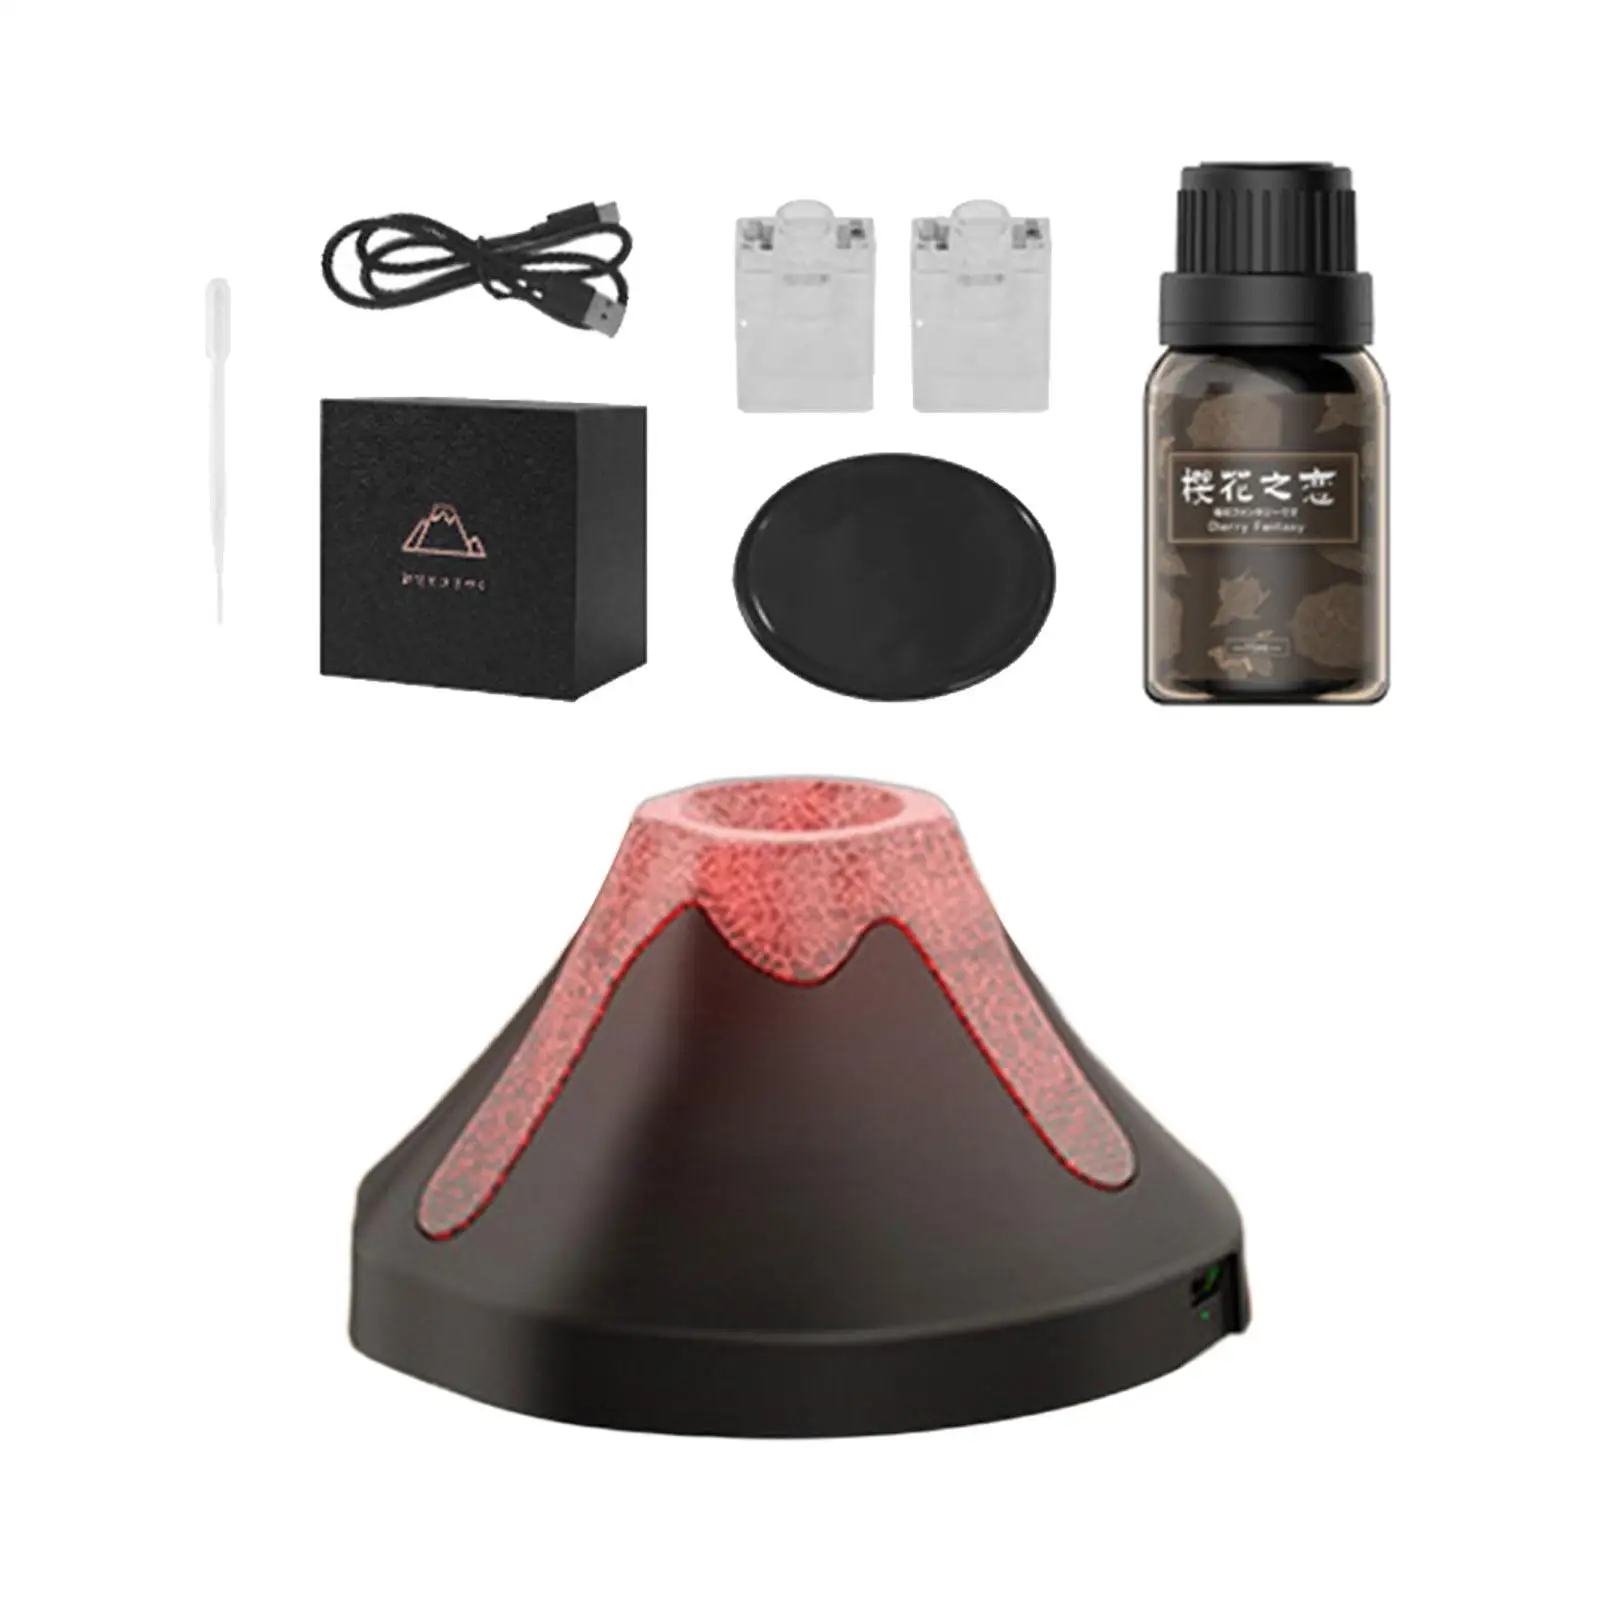 Volcano Fragrance Diffusers Humidifier for Decoration Home Room Yoga